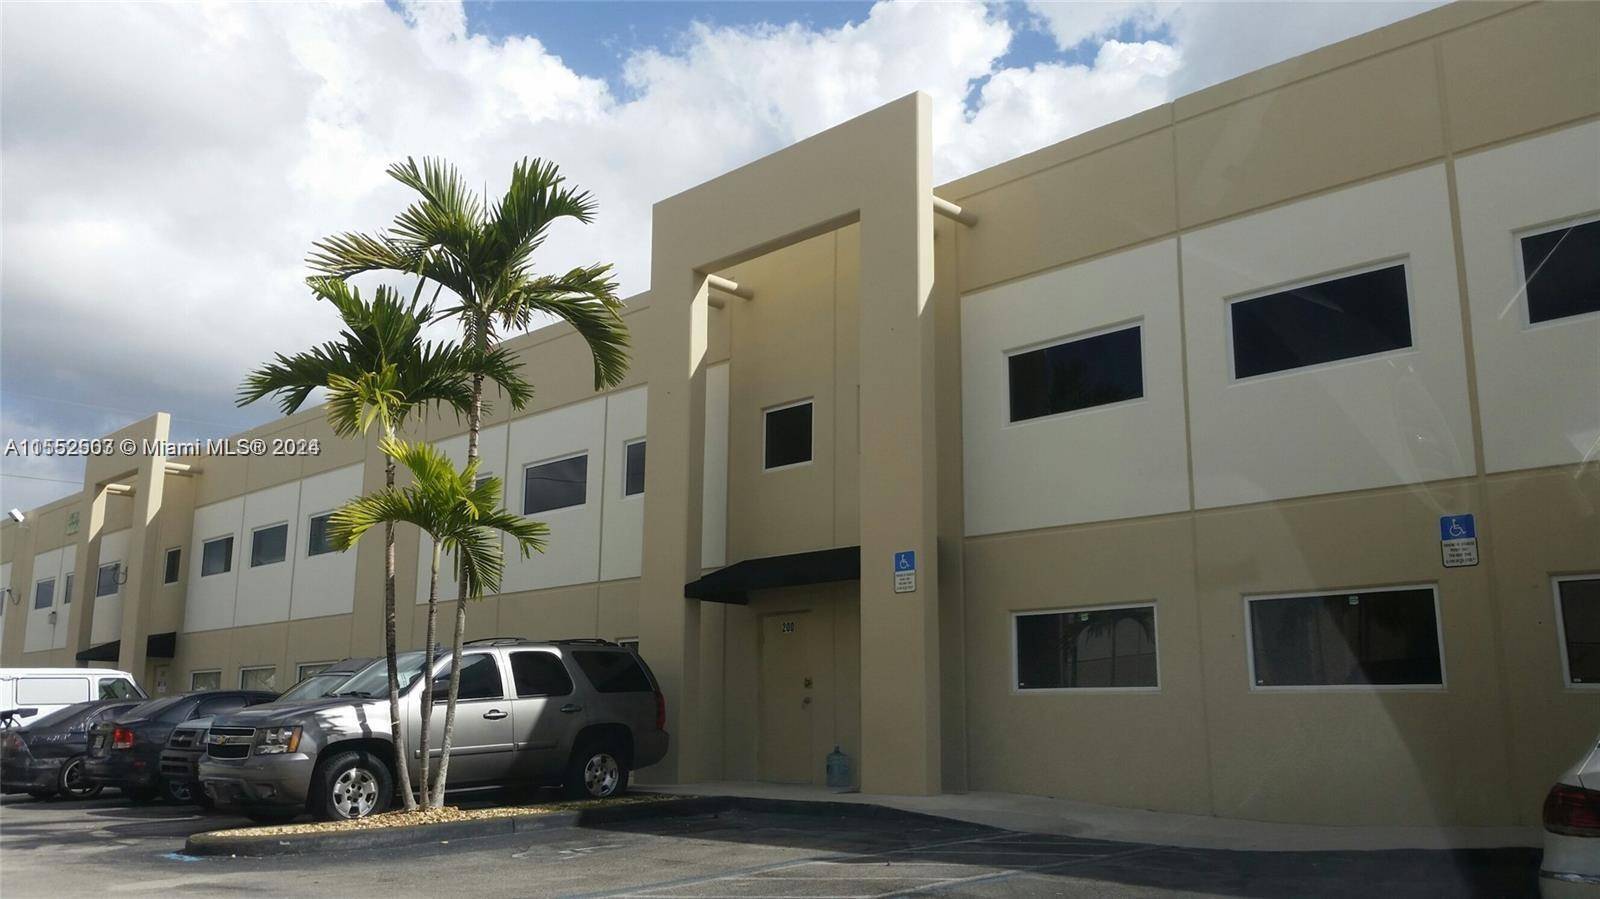 4, 000 SF Very nice dock height office warehouse unit with beautiful offices with glass divisions.